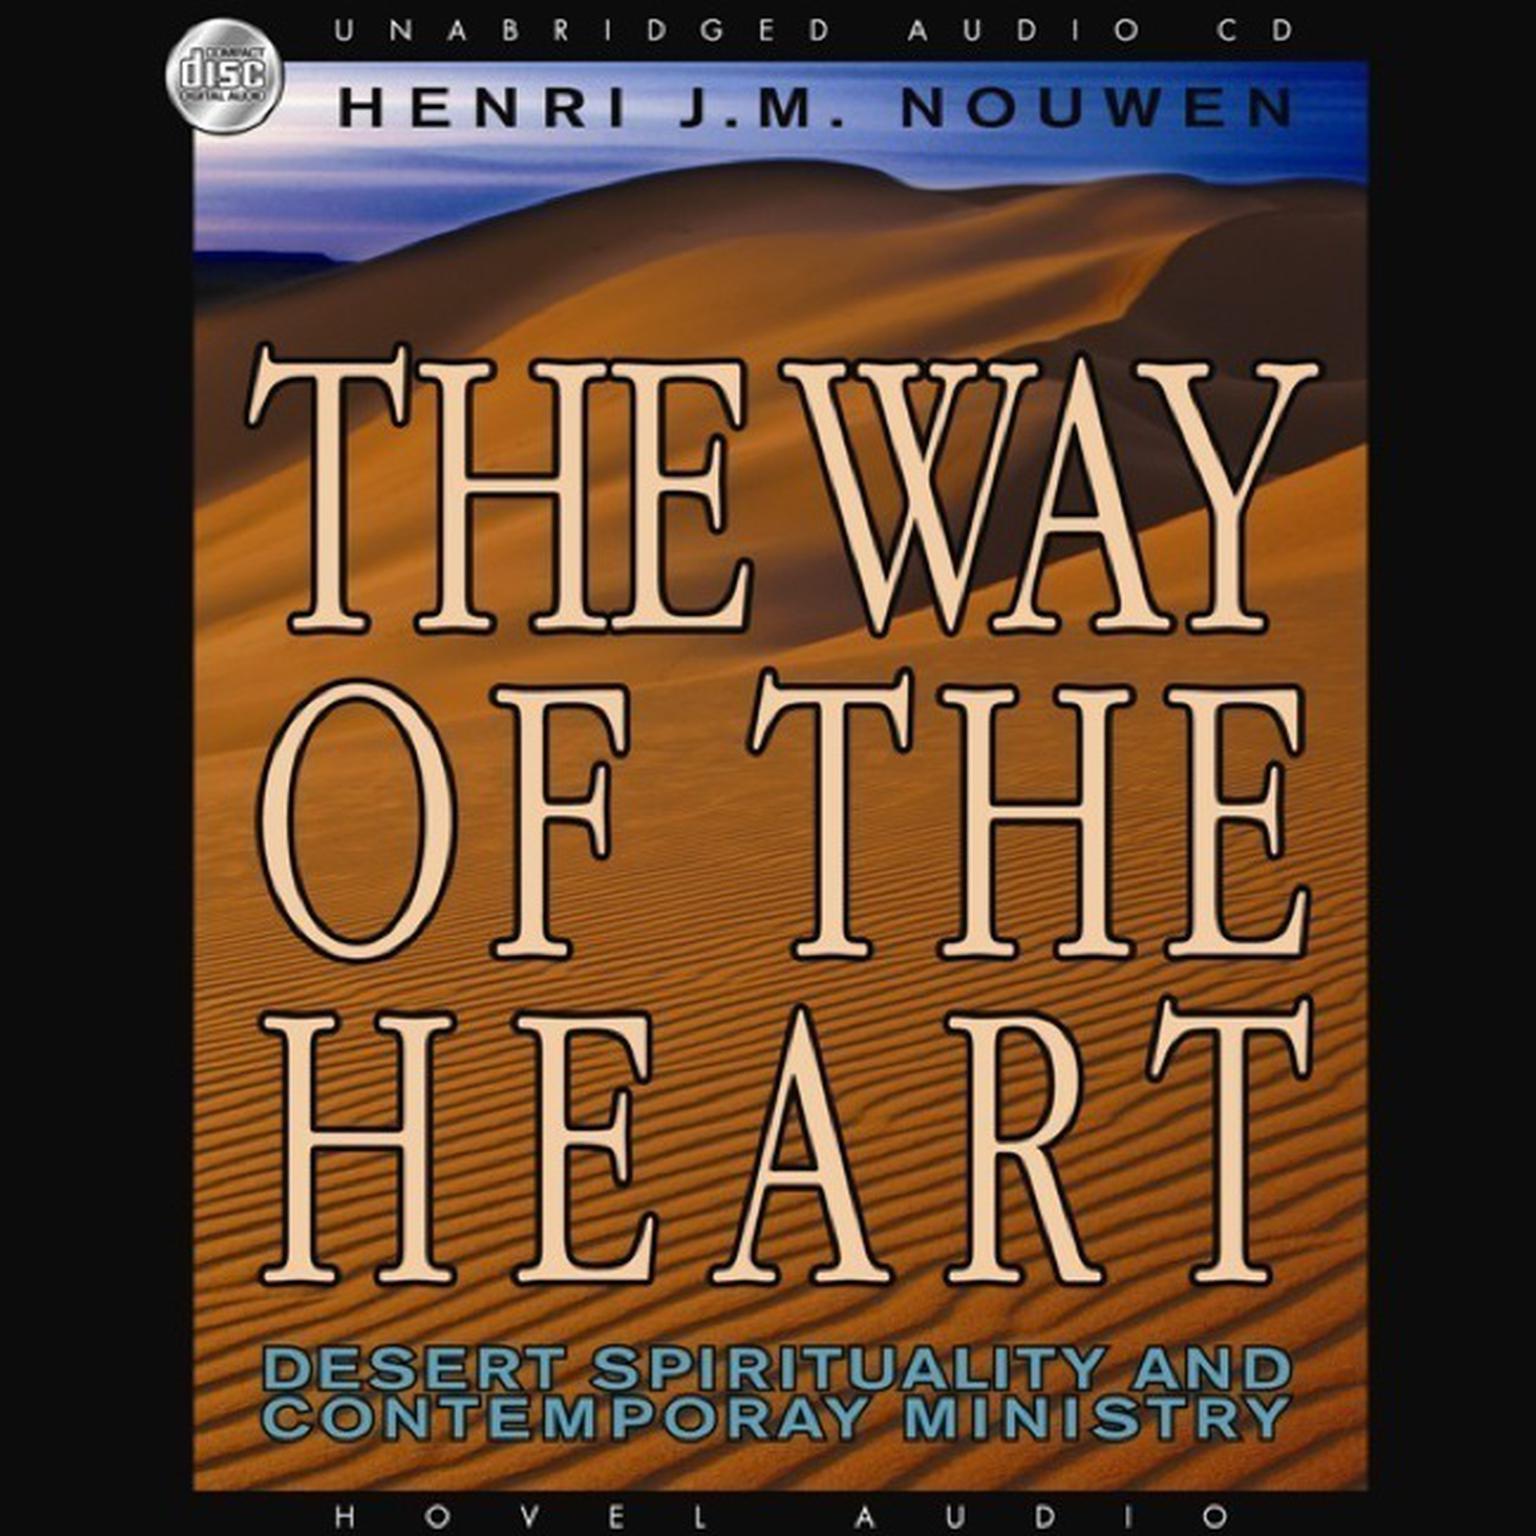 Way of the Heart: Desert Spirituality and Contemporary Ministry Audiobook, by Henri J. M. Nouwen